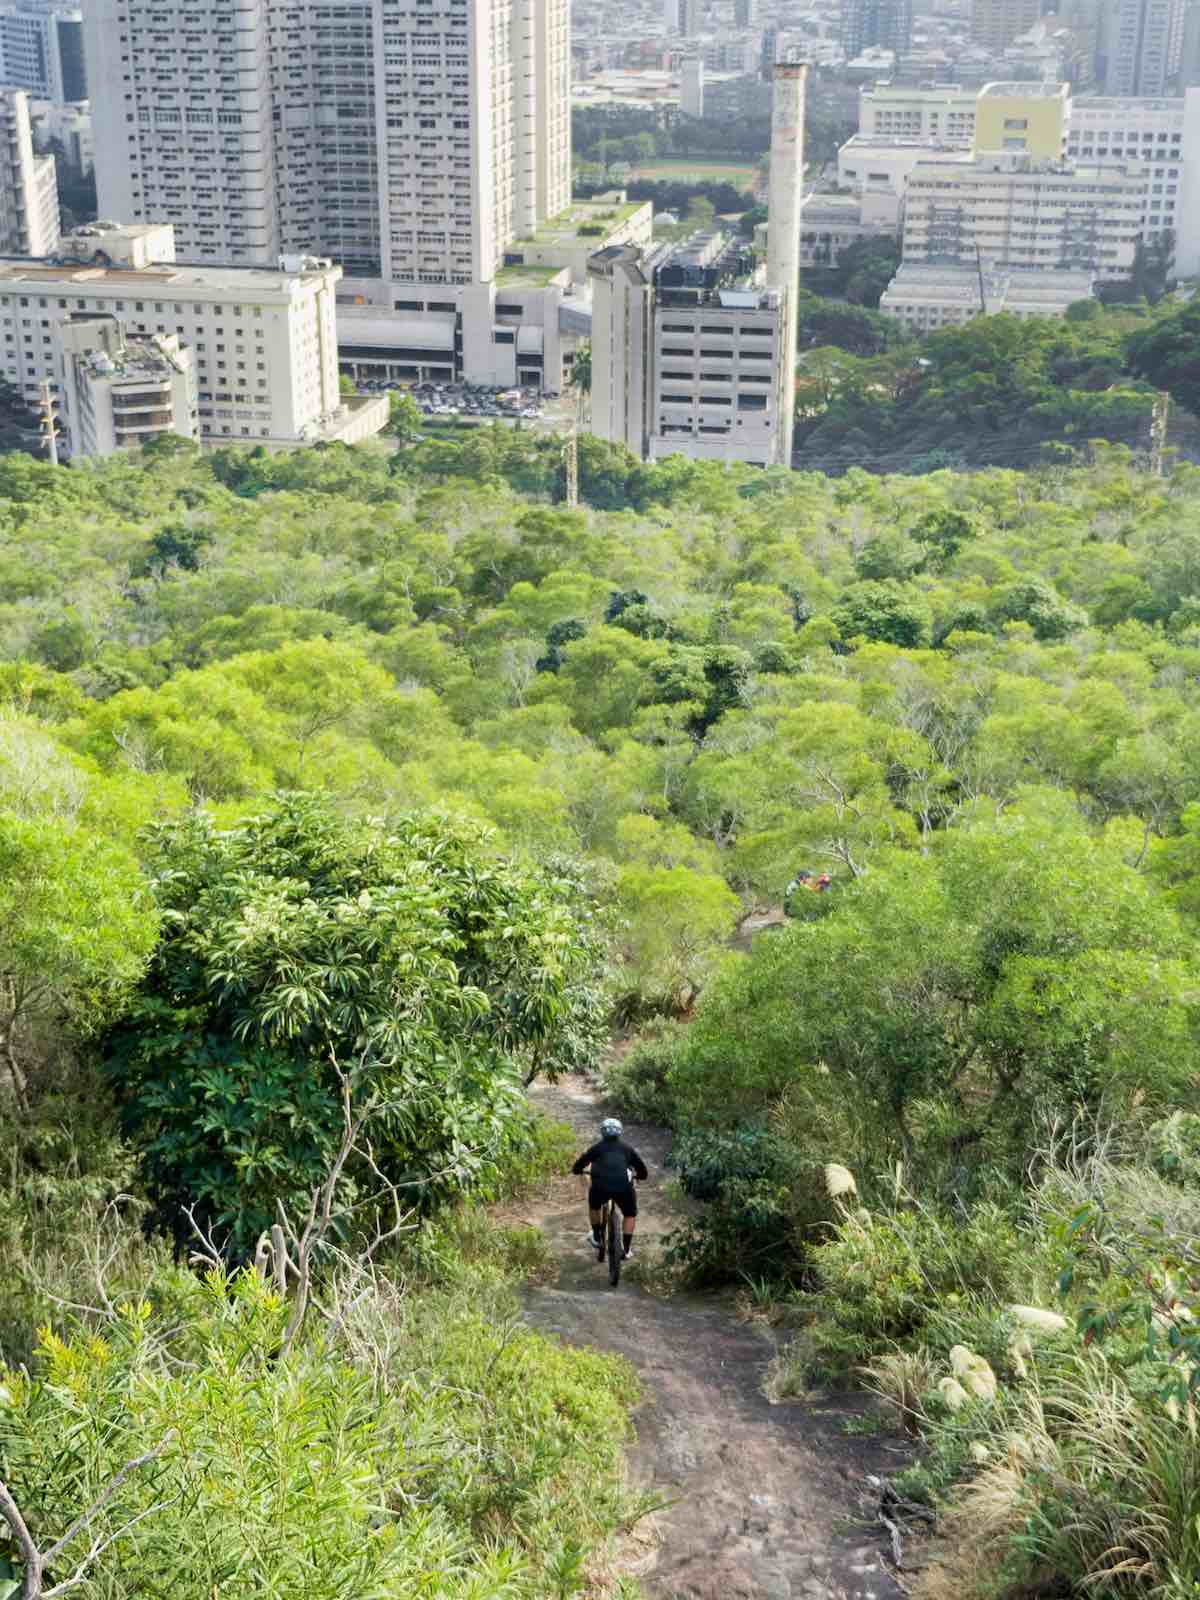 bikerumor pic of the day mountain biker riding trail from top of tree filled mountain into large city of Taipei, Taiwan, below.